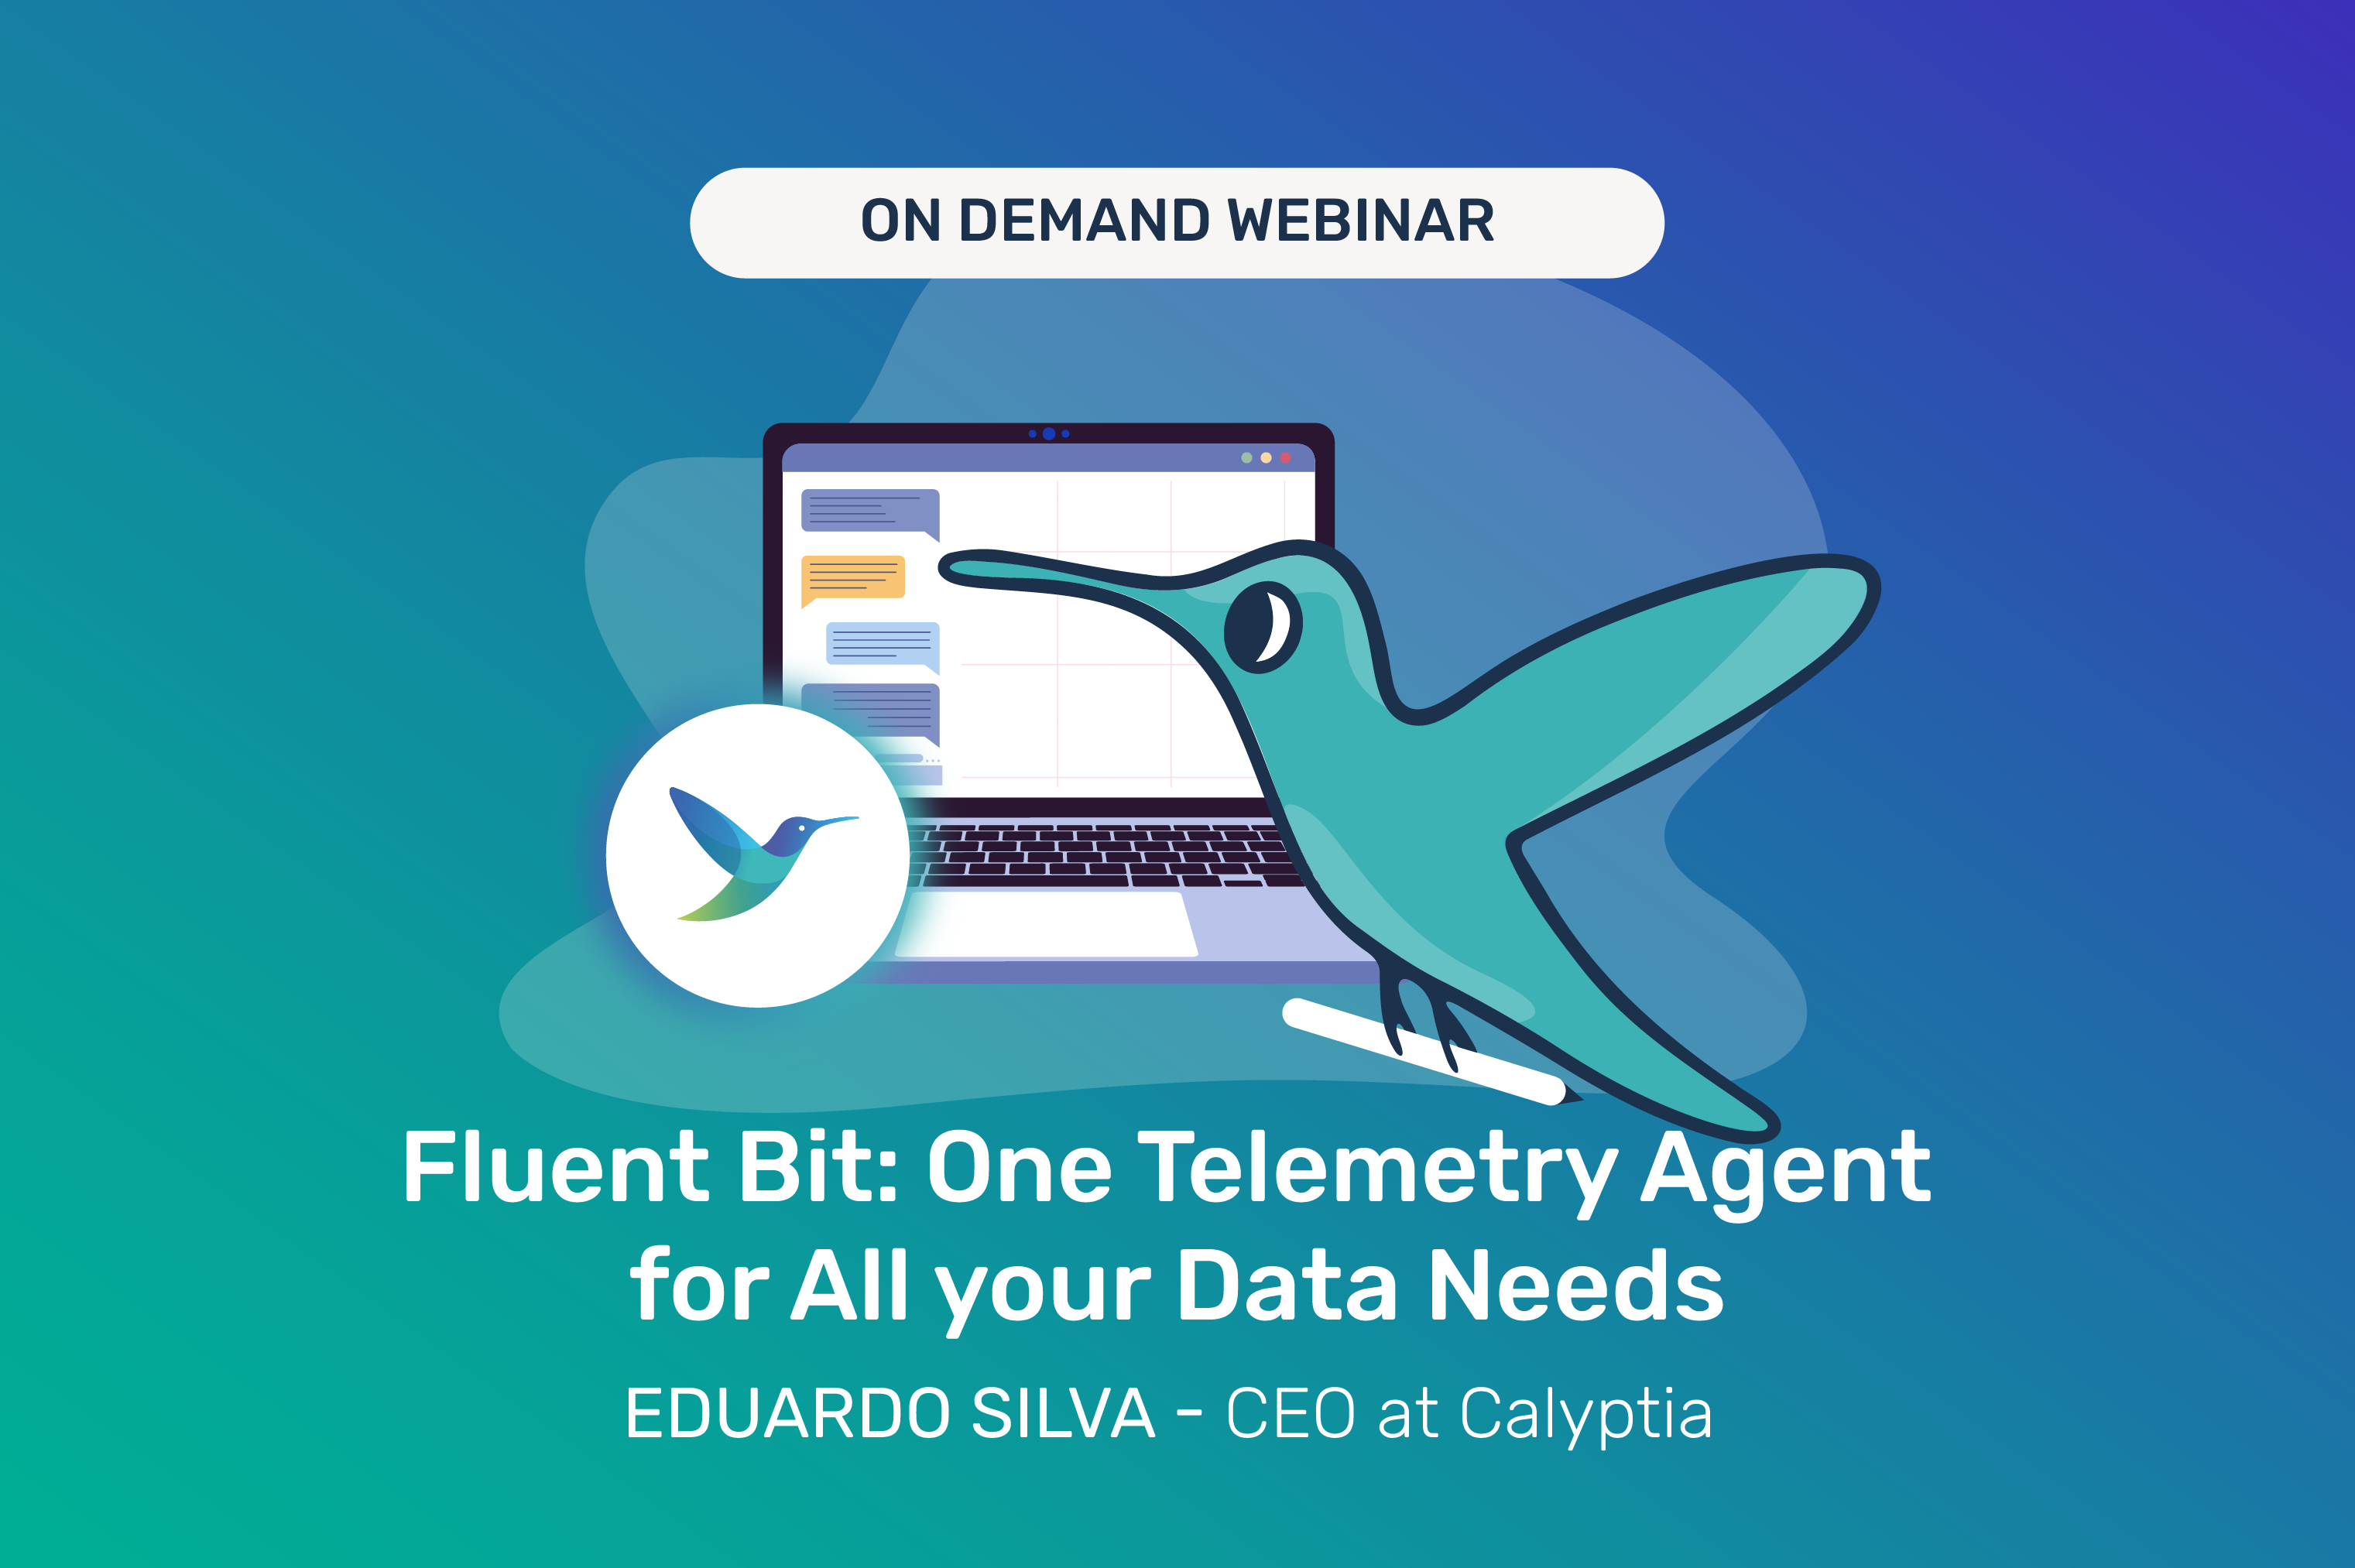 Fluent Bit: One Telemetry Agent for All your Data Needs